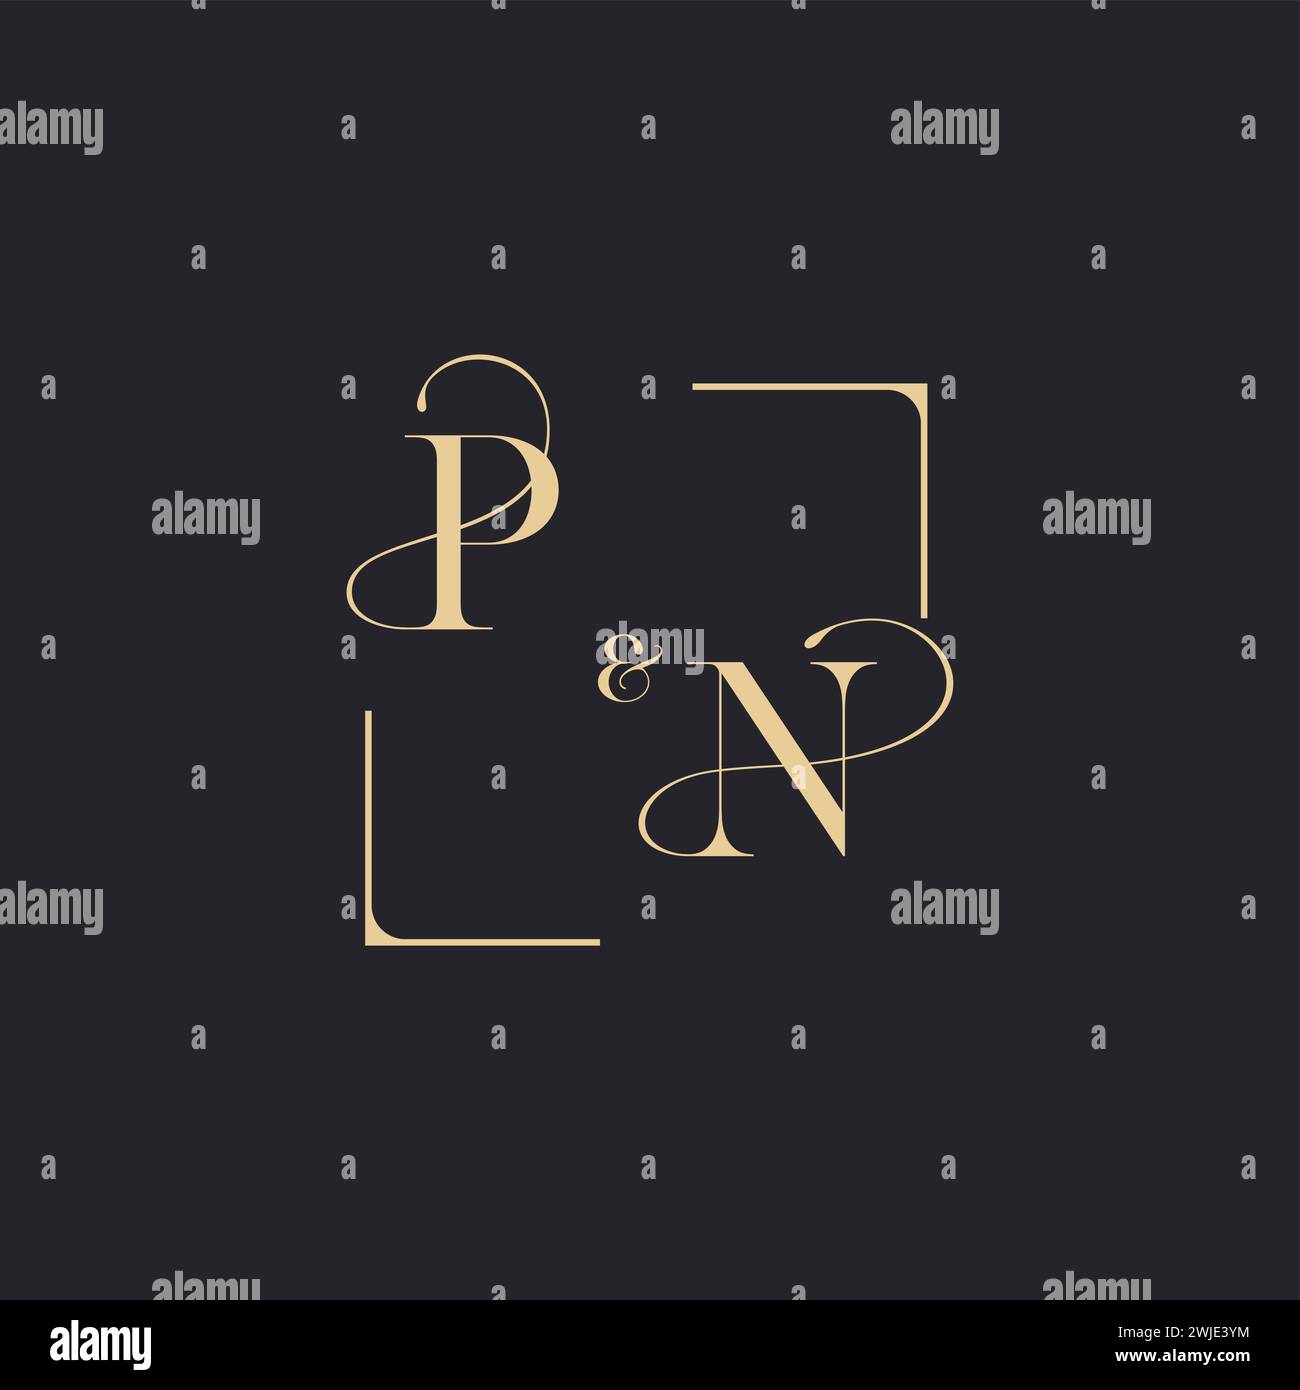 PN simple concept of wedding outline logo and square of initial design gold in white background Stock Vector